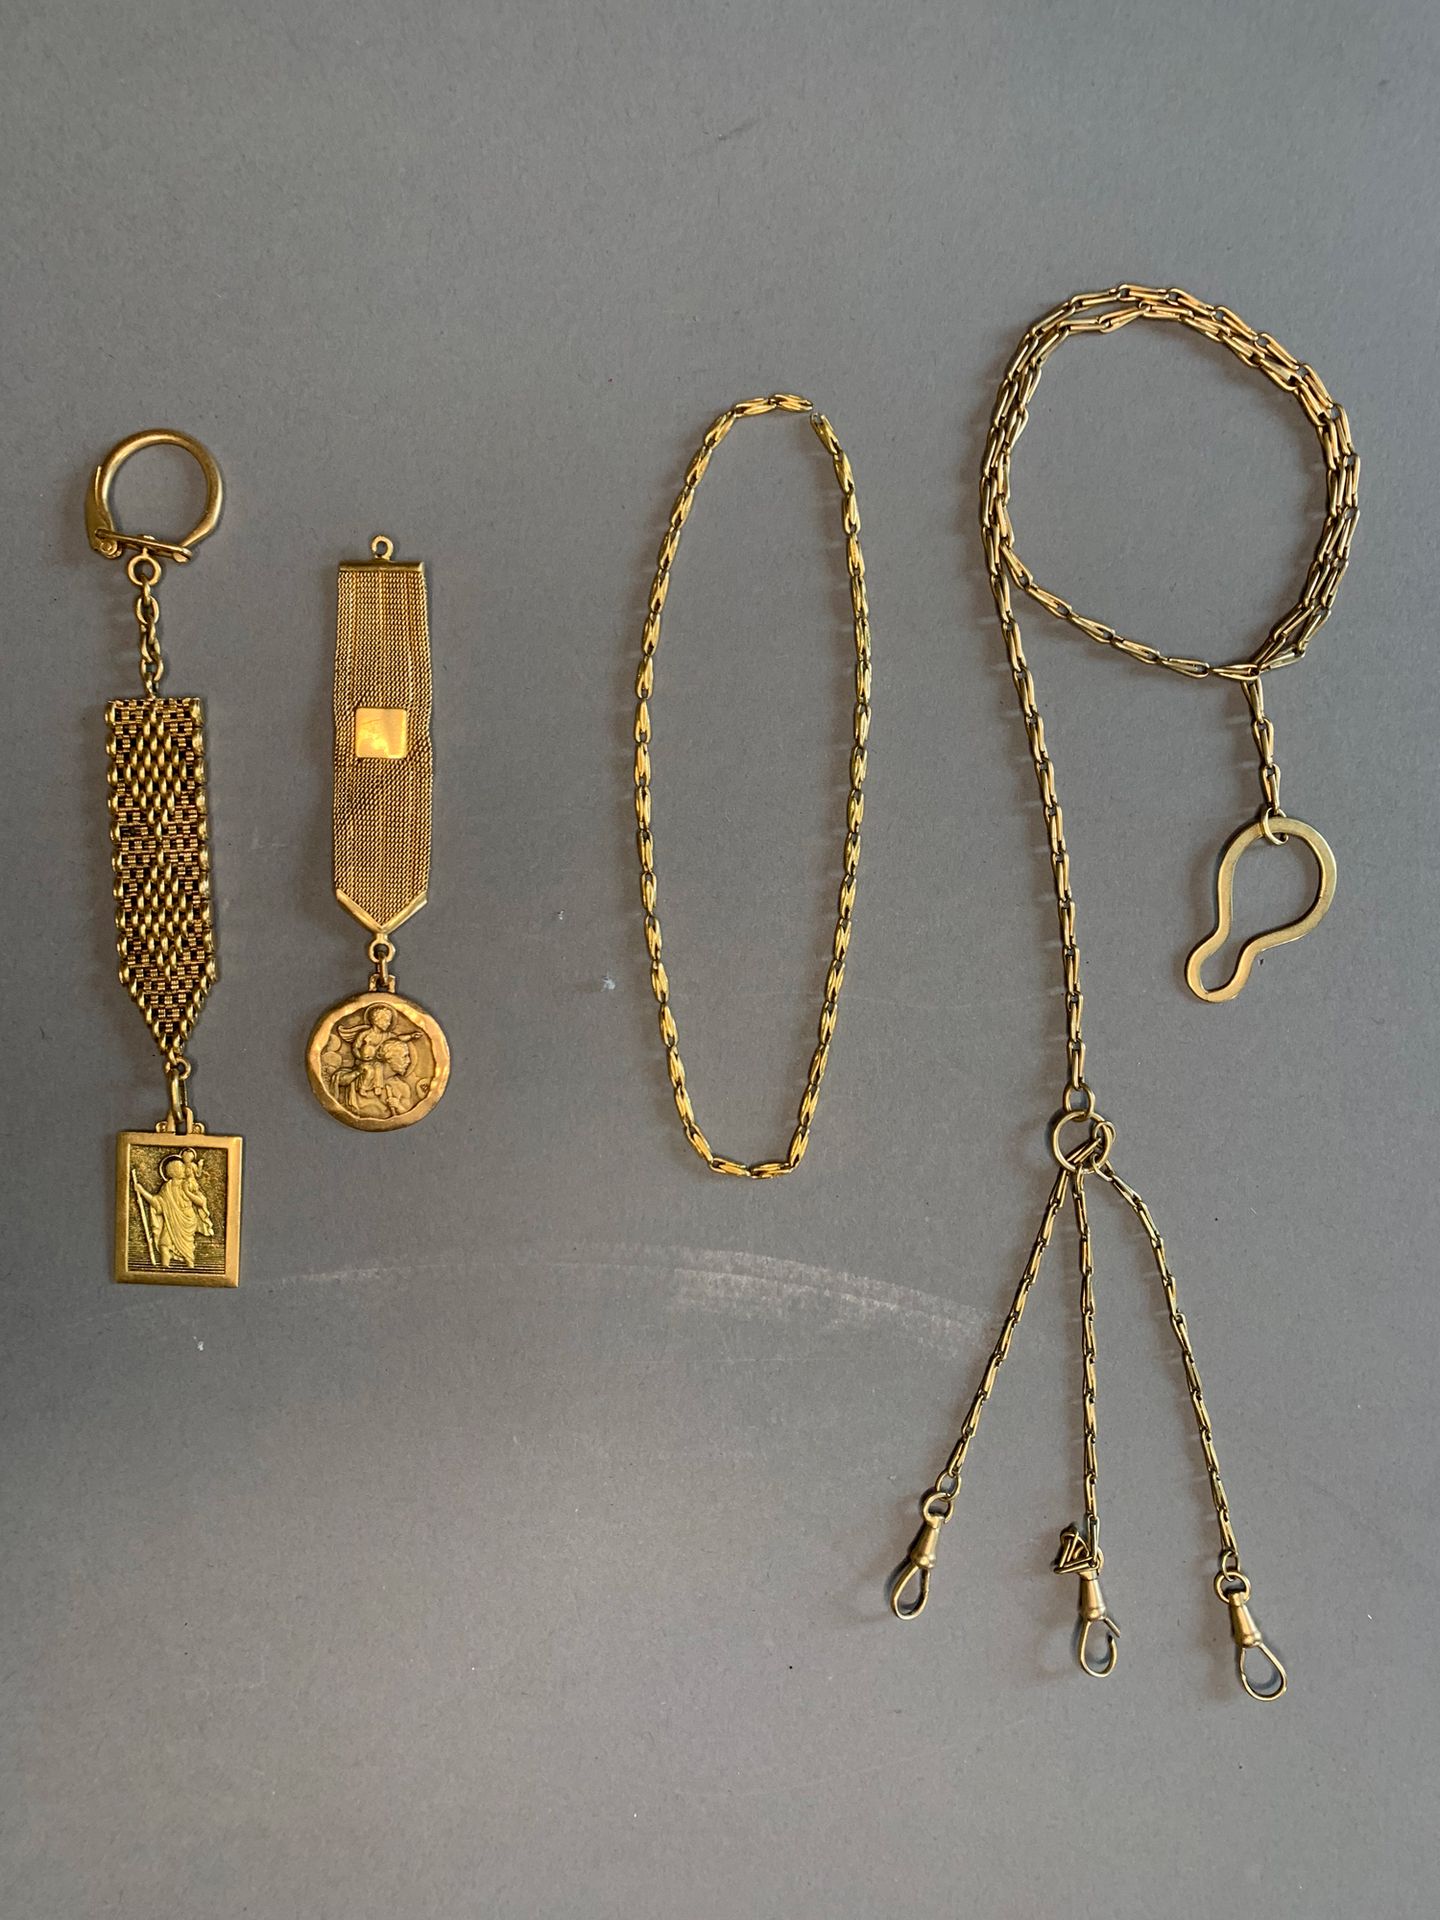 Null Lot in yellow gold.
It includes two key rings with St. Christopher medal, a&hellip;